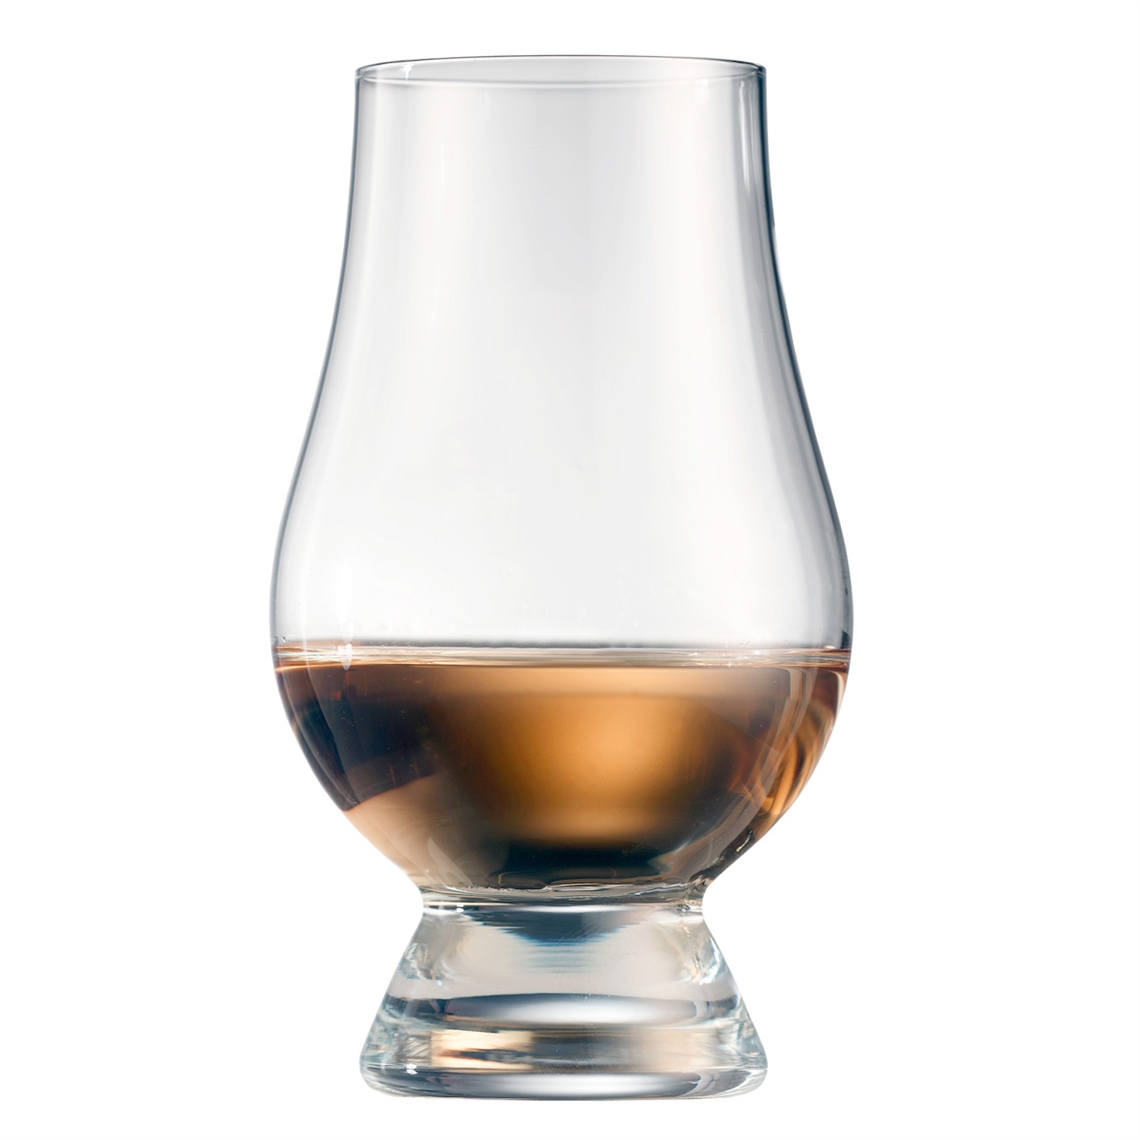 View more riedel extreme from our Whisky Glasses range